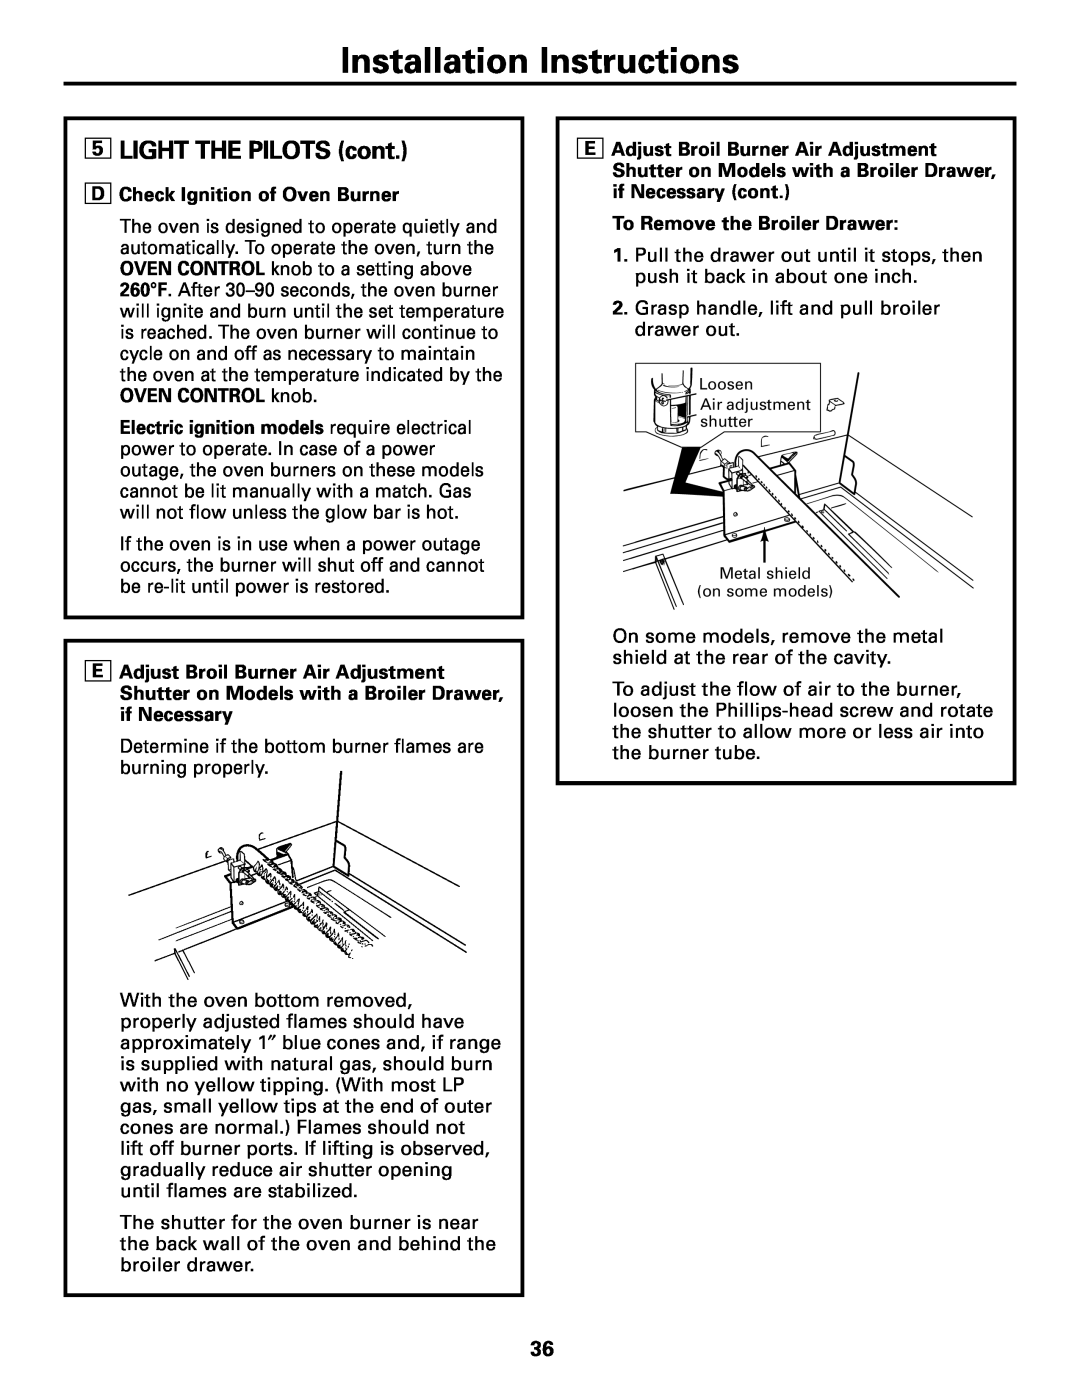 GE JGBS17 Installation Instructions, LIGHT THE PILOTS cont, D Check Ignition of Oven Burner, To Remove the Broiler Drawer 